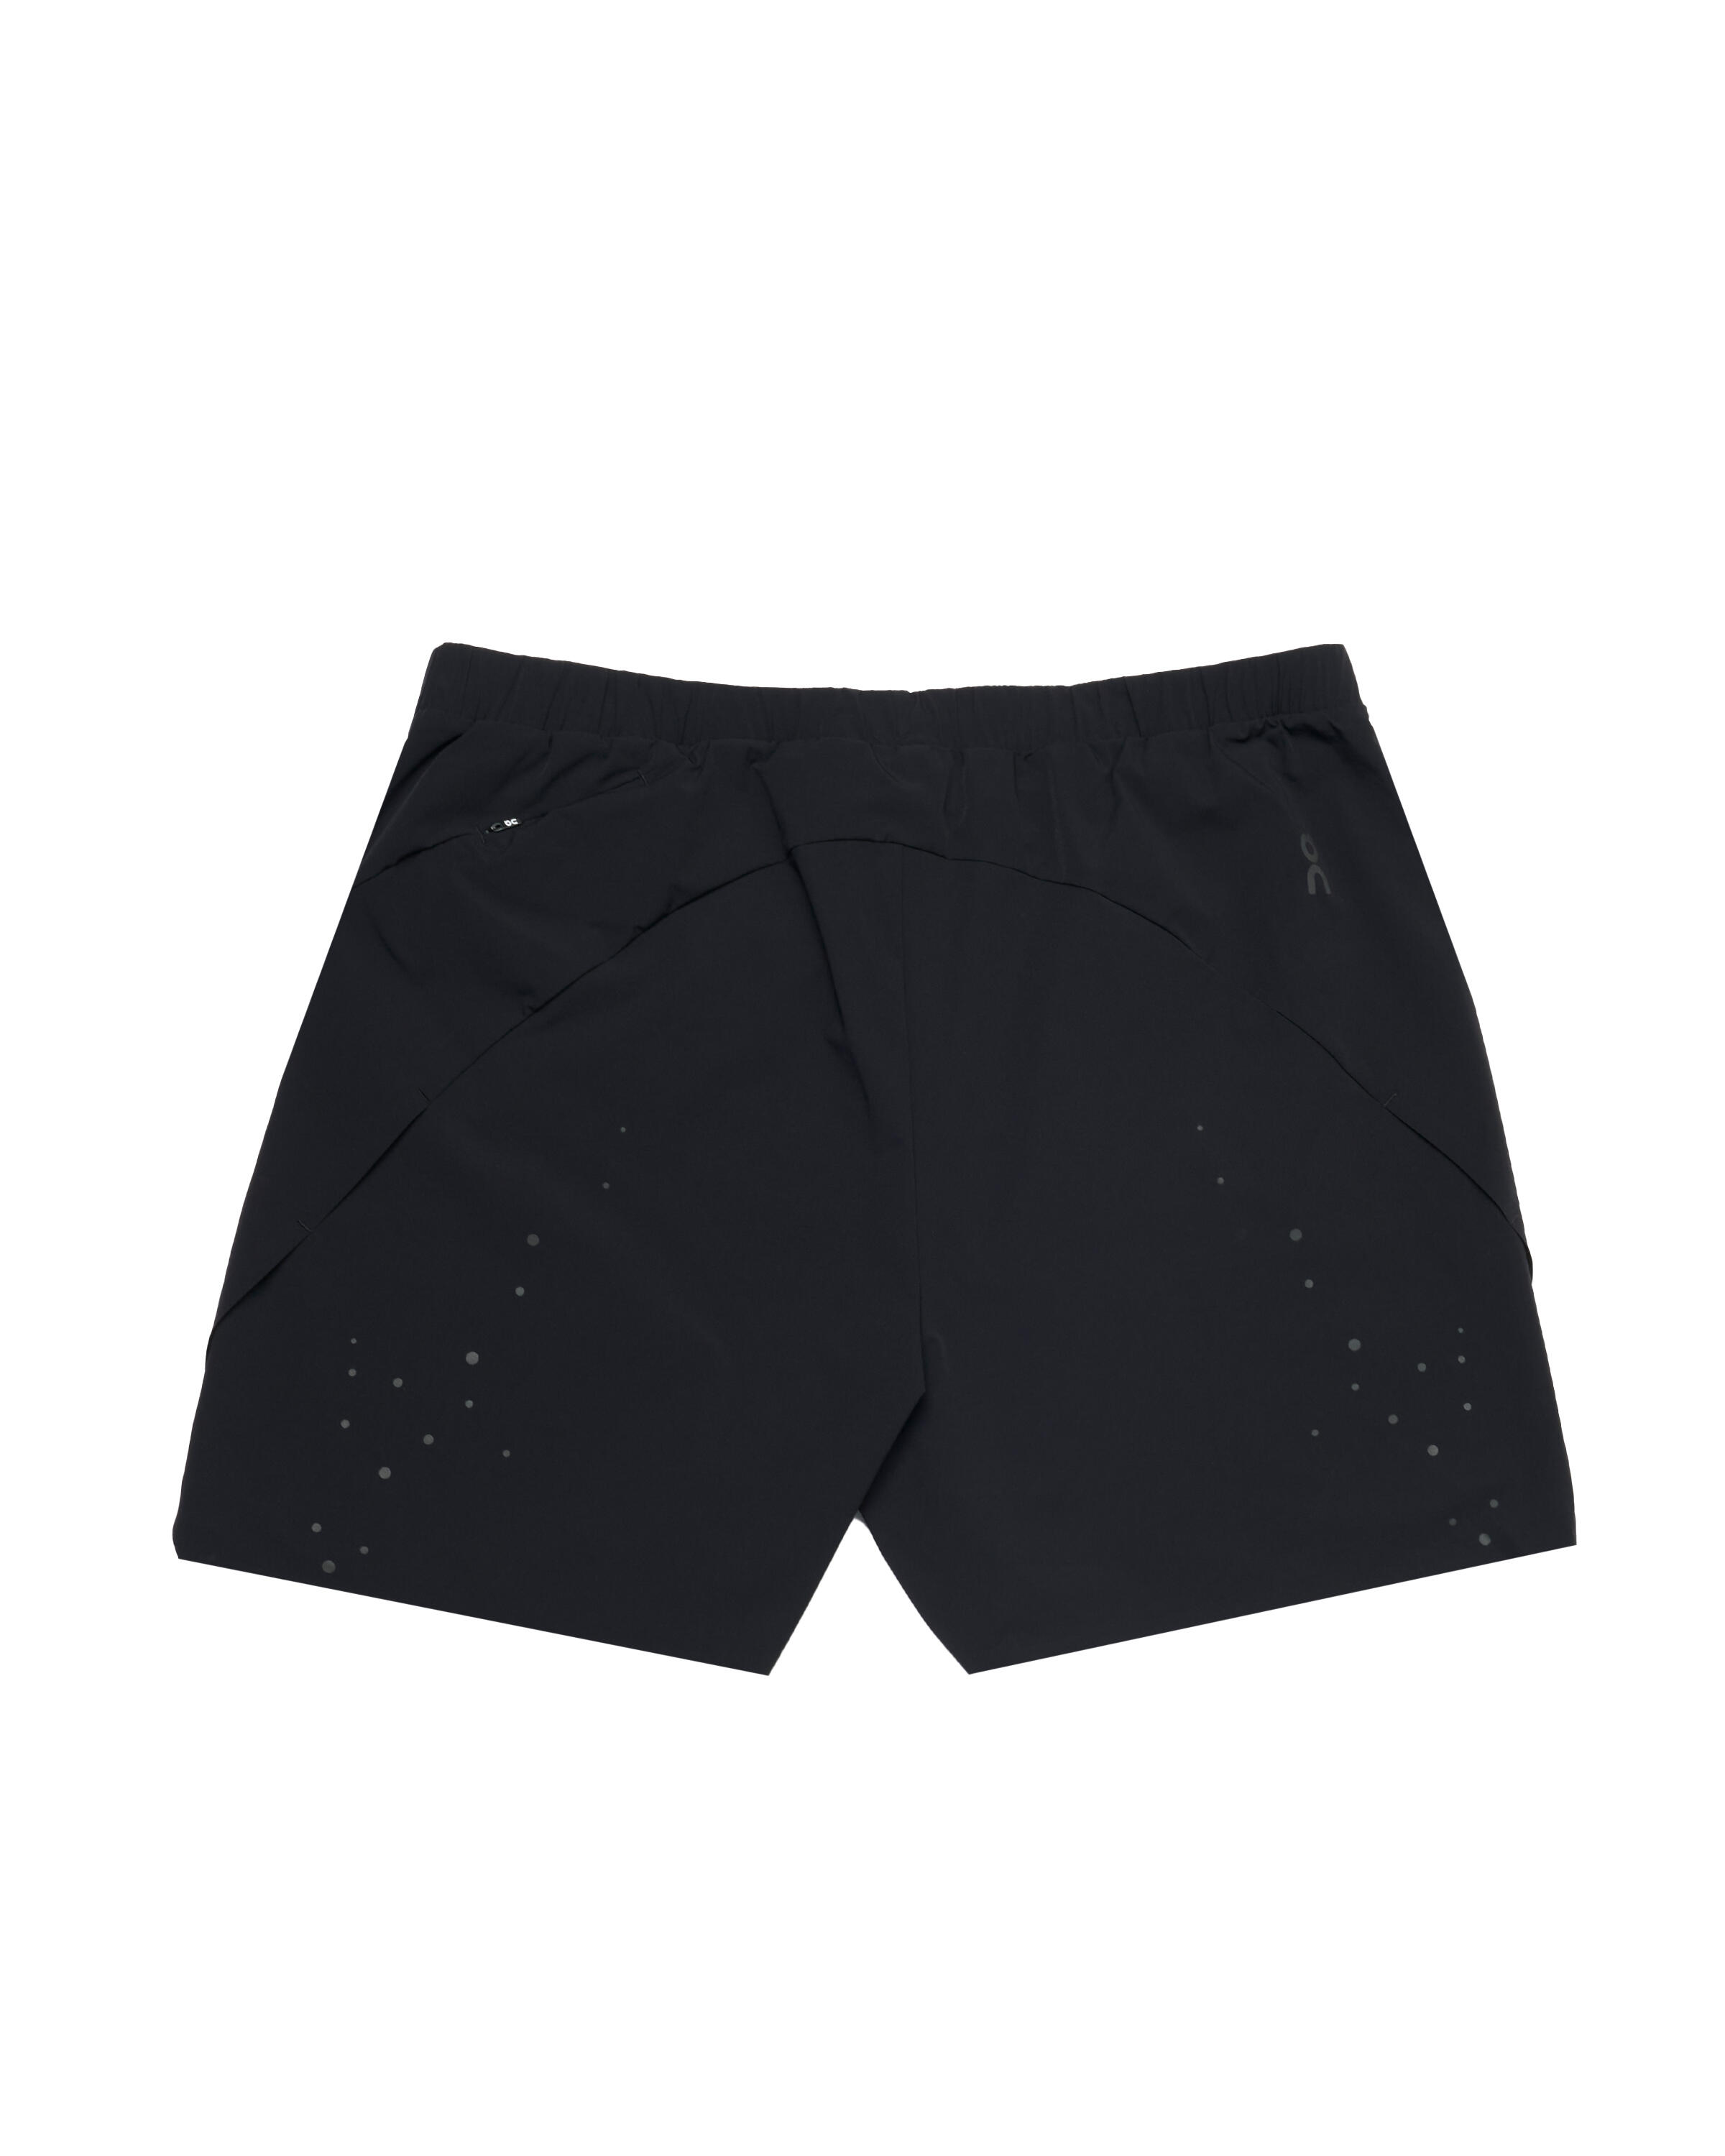 ON Running x PAF Shorts